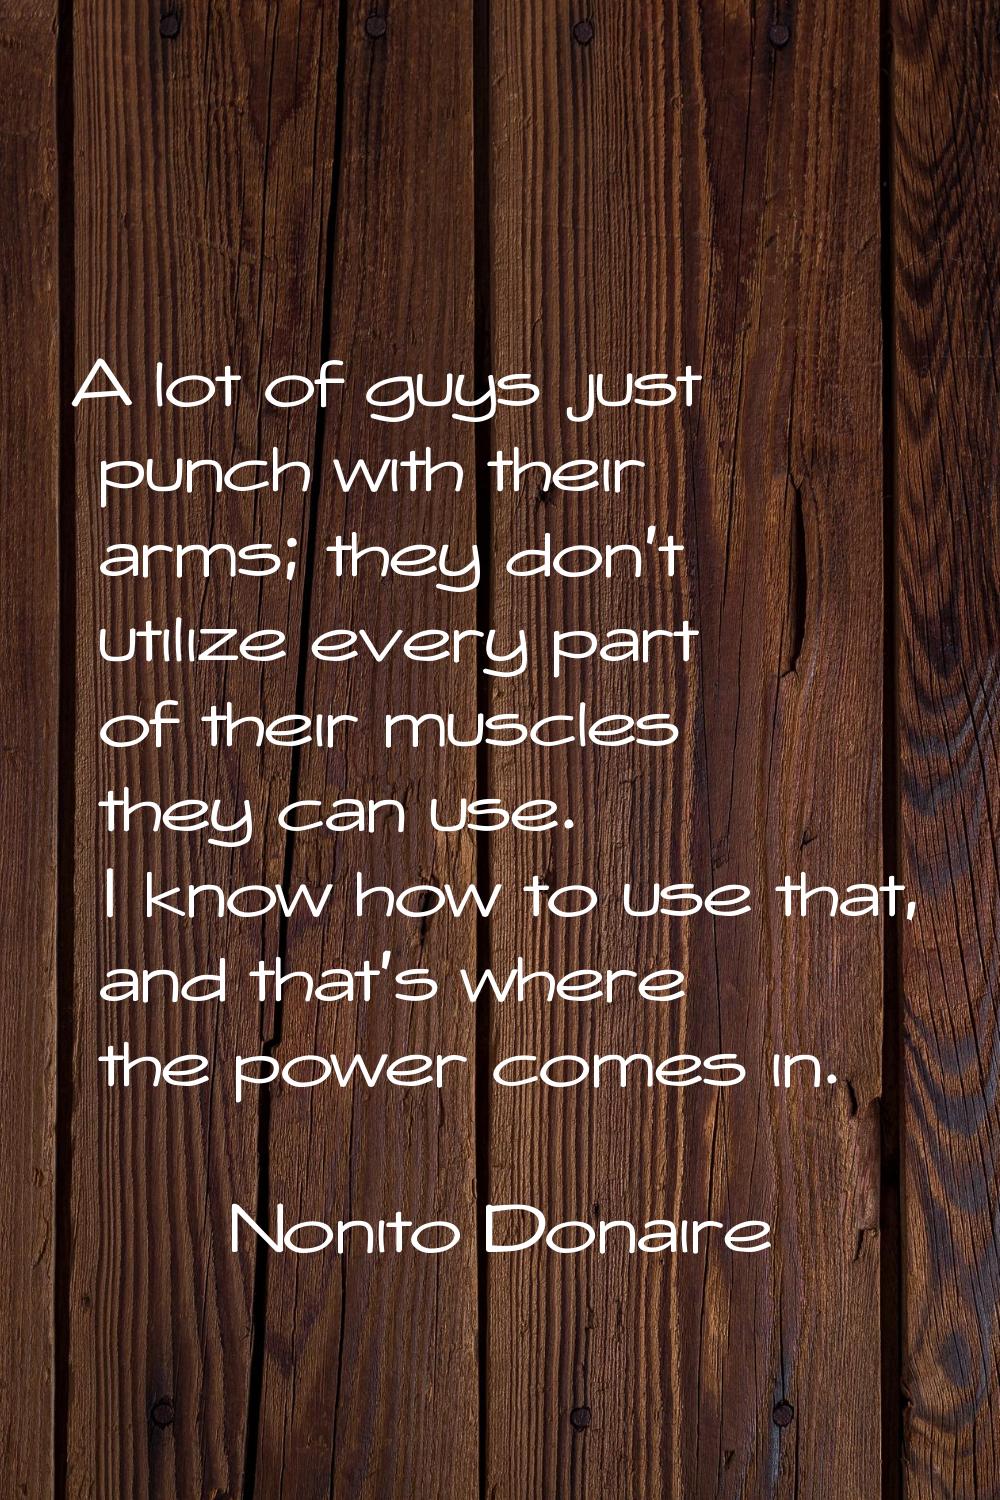 A lot of guys just punch with their arms; they don't utilize every part of their muscles they can u